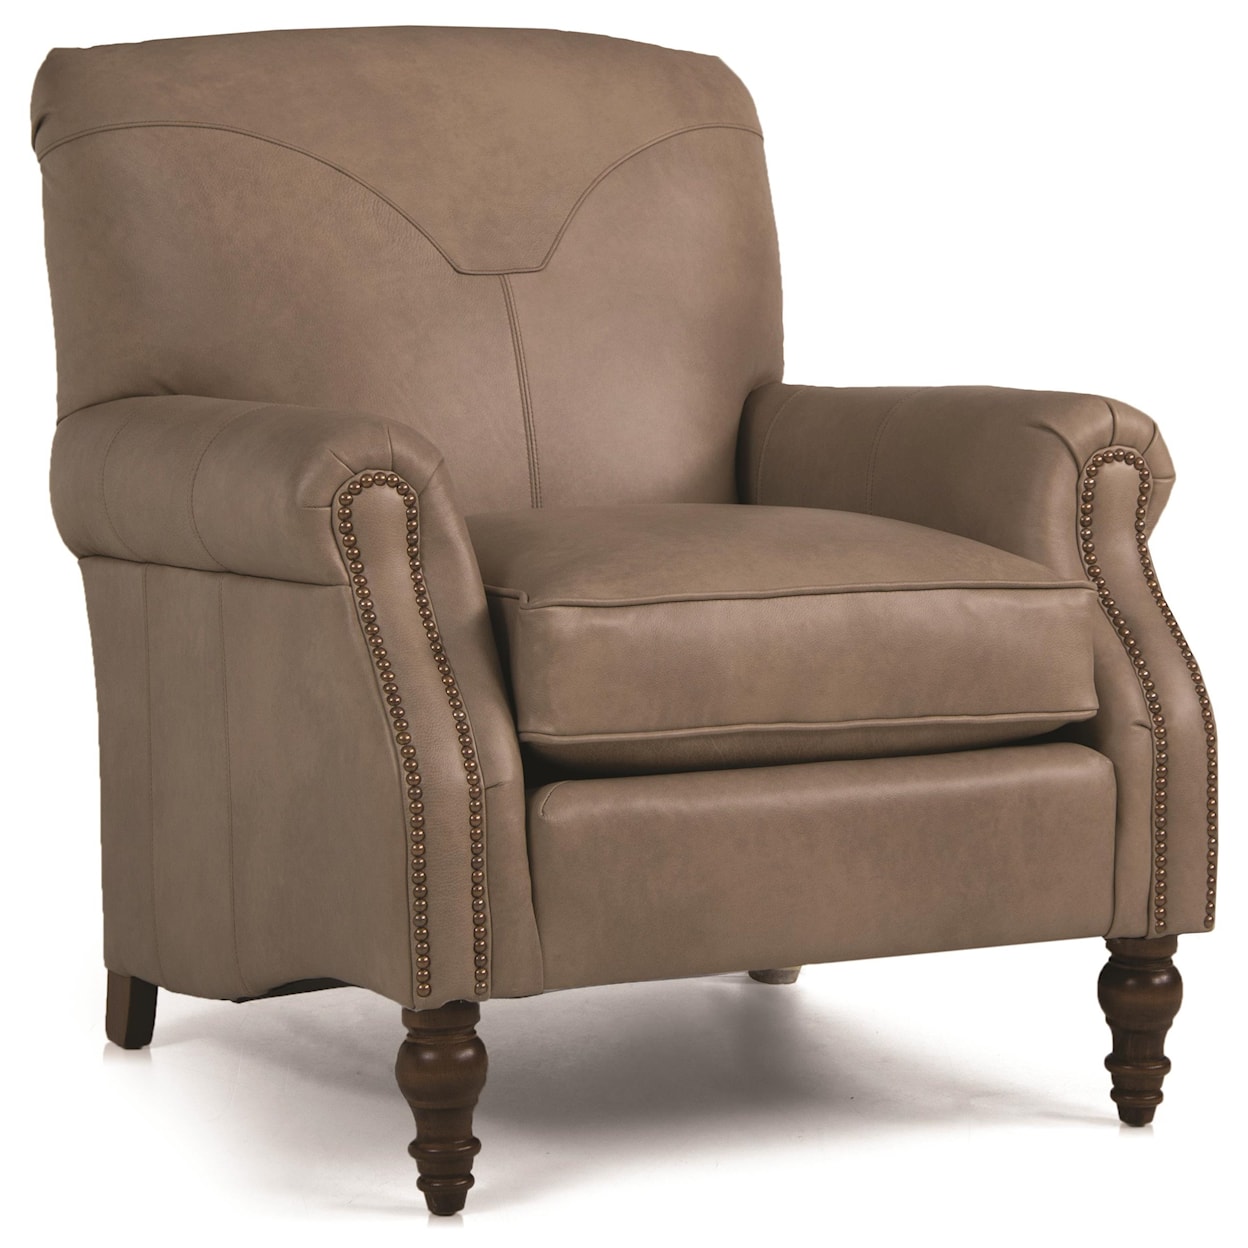 Smith Brothers Landry Chair